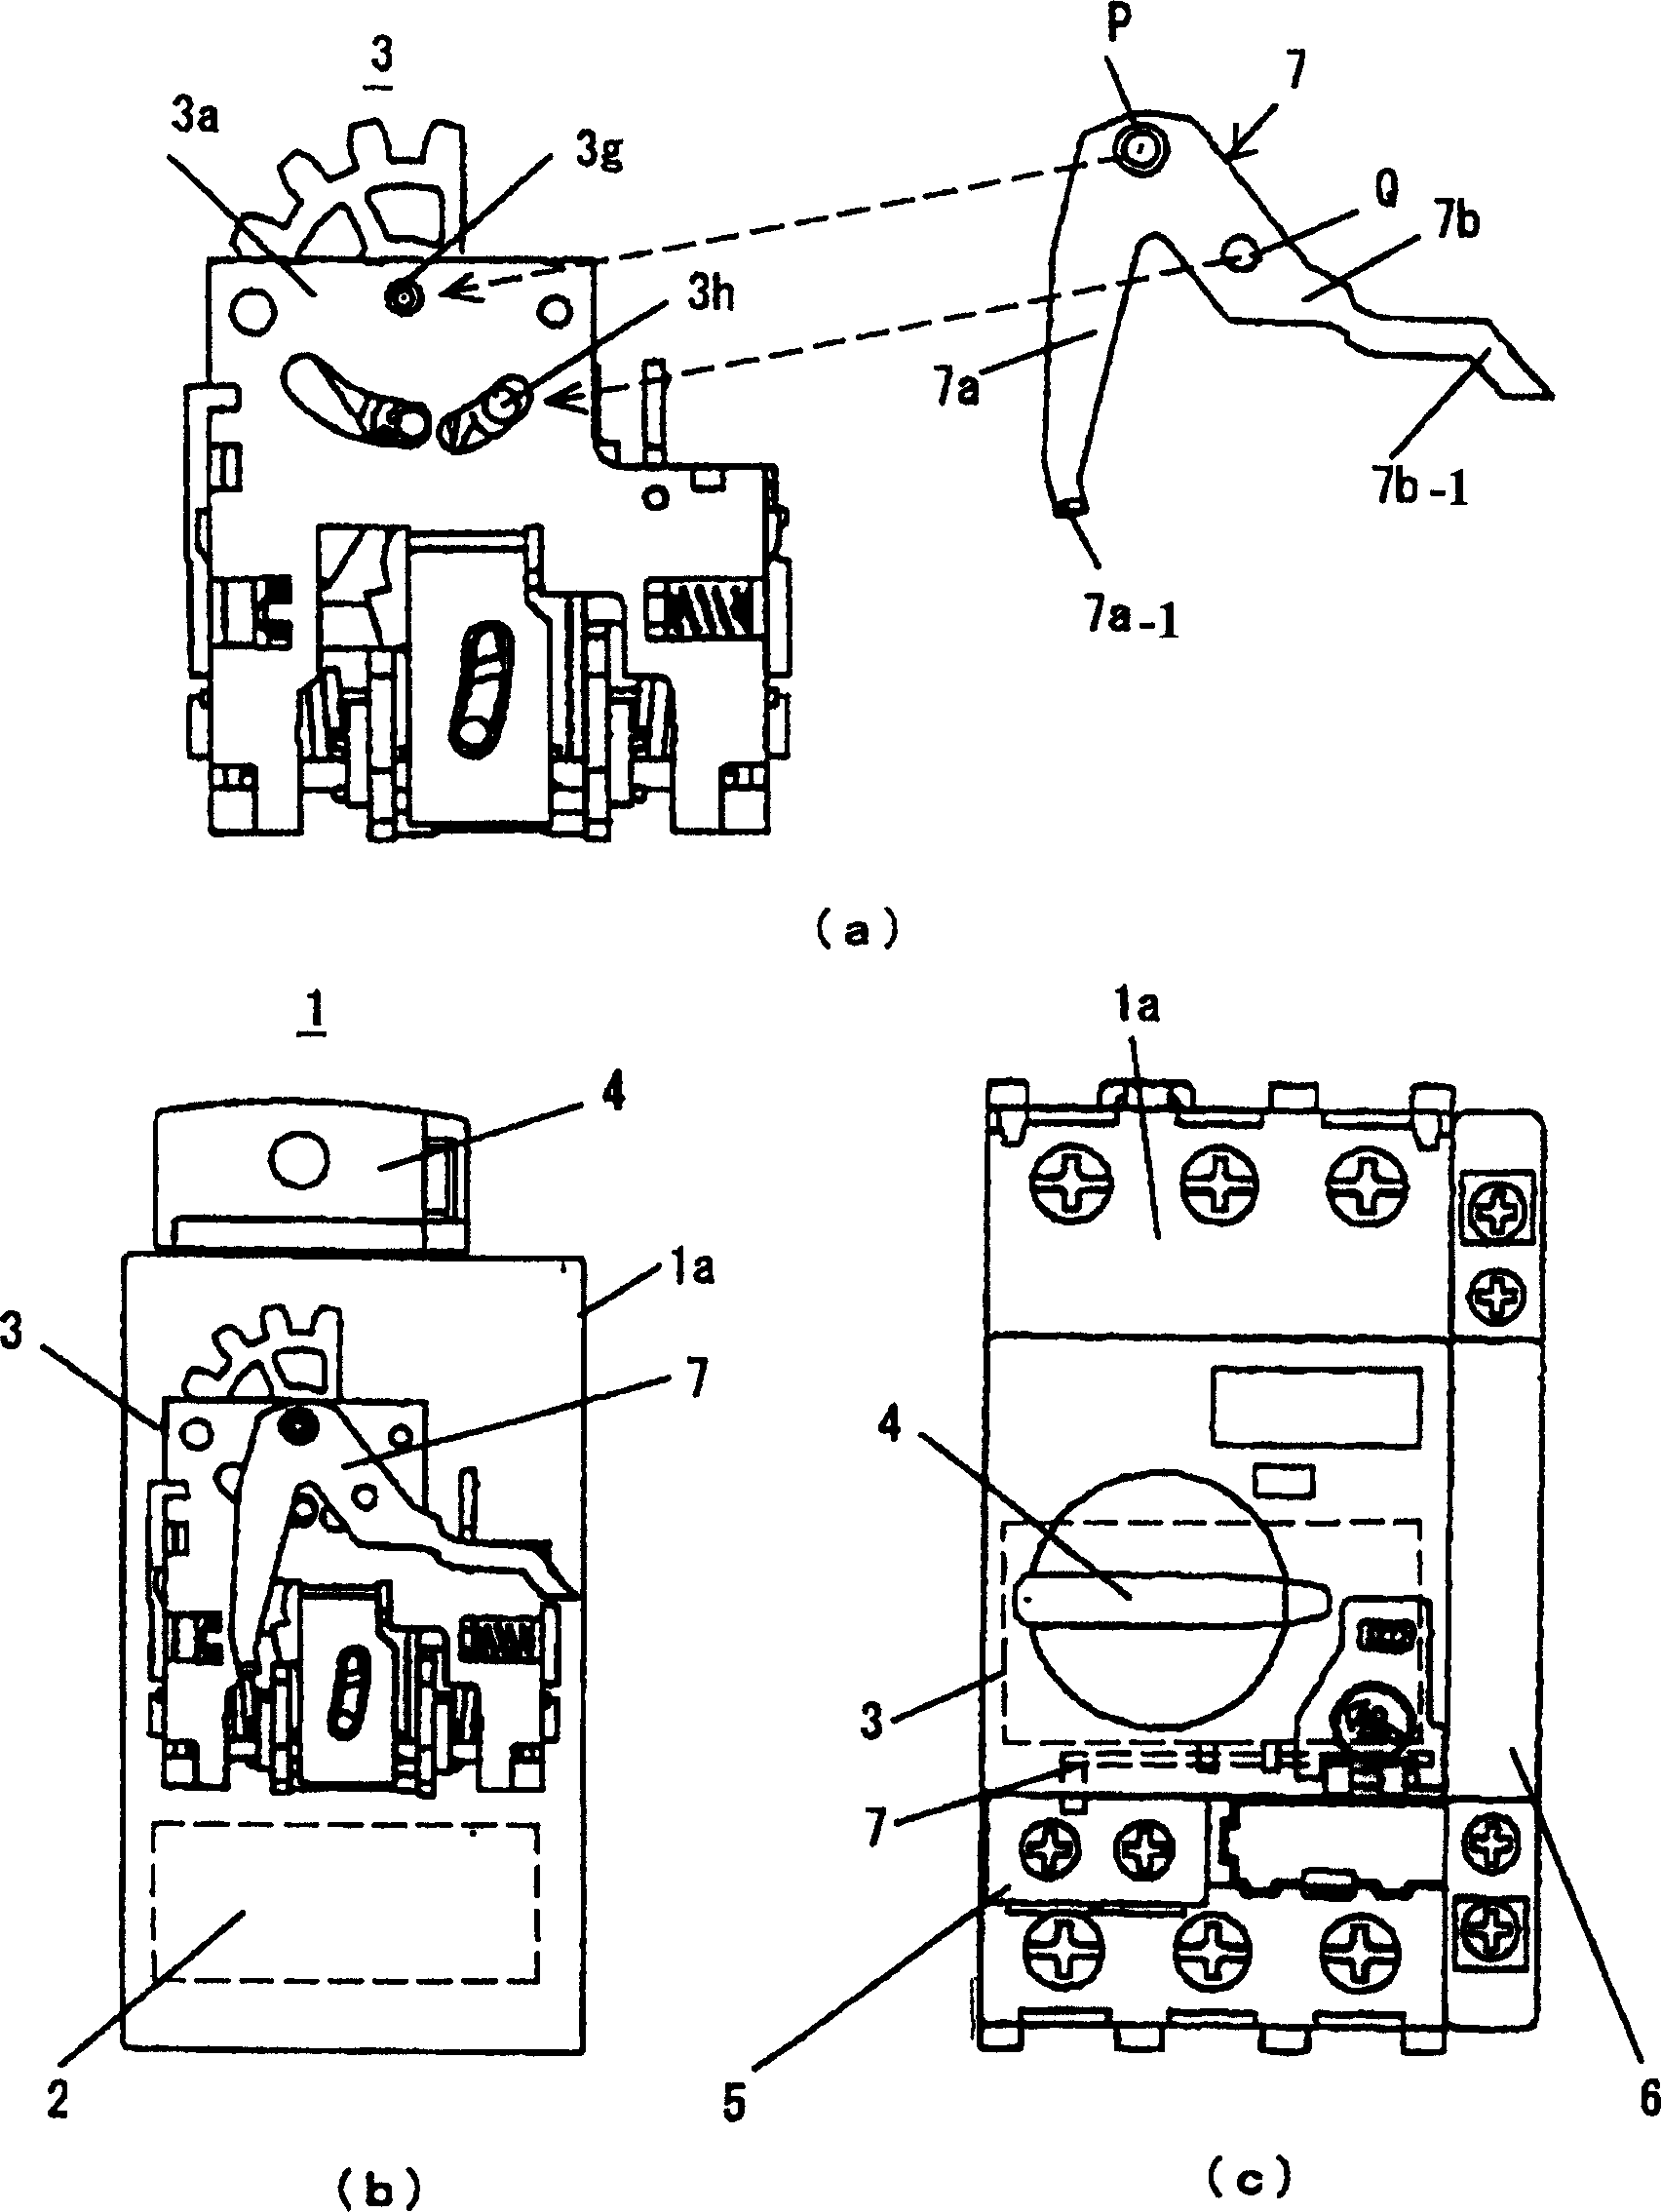 Alarm output device for circuit breaker